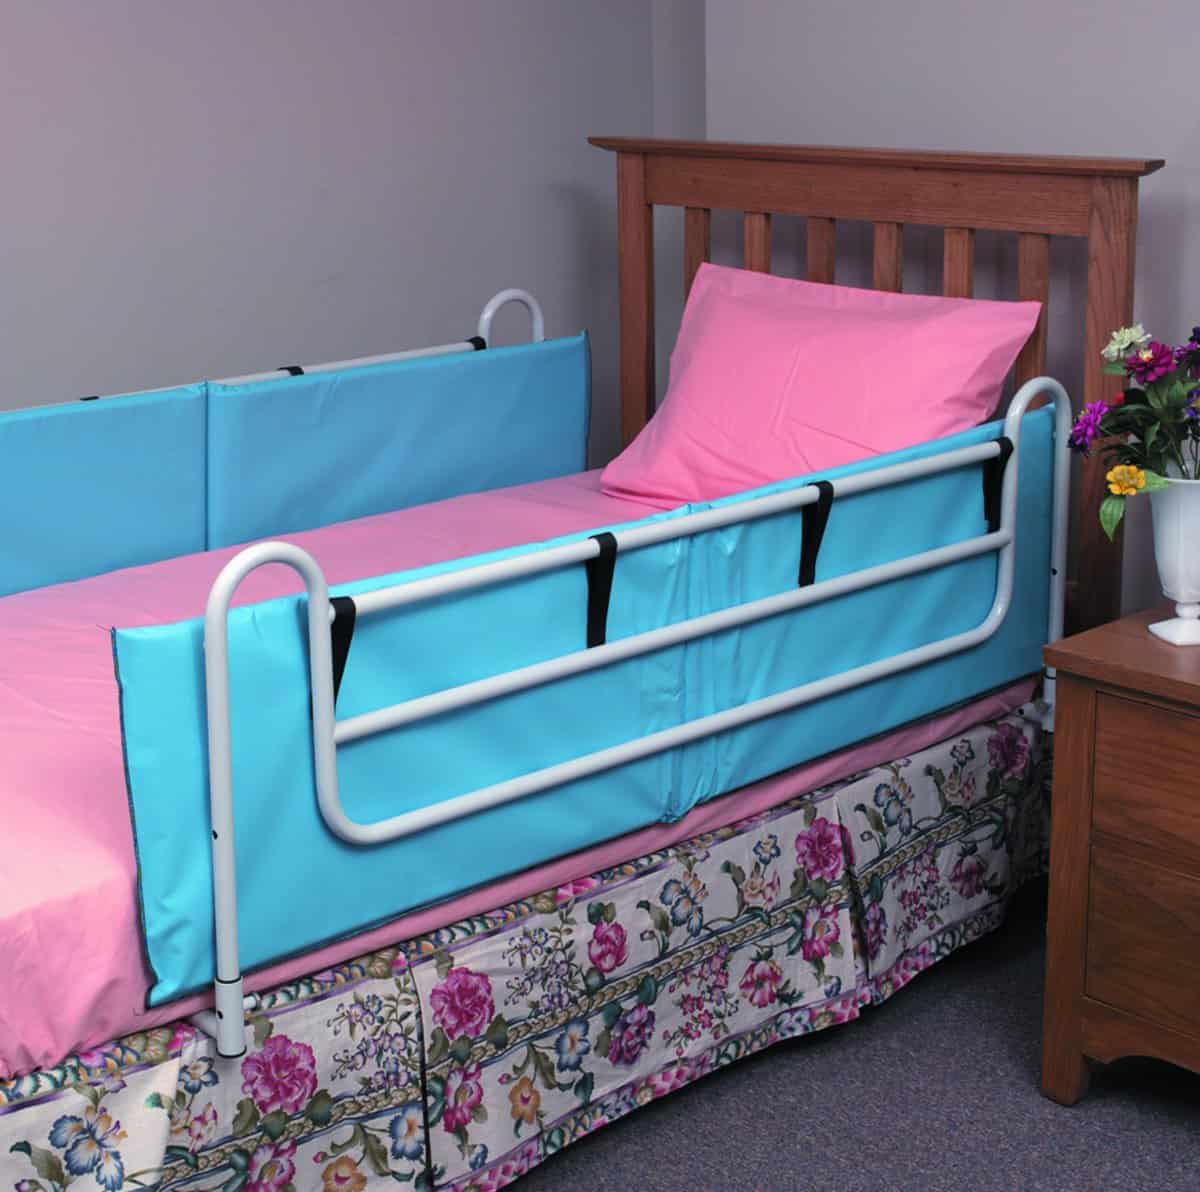 DMI Vinyl Bed Rail Cushions with Non-Allergenic Cover - Bed Rail Bumper Pads - Senior.com Bed Rails